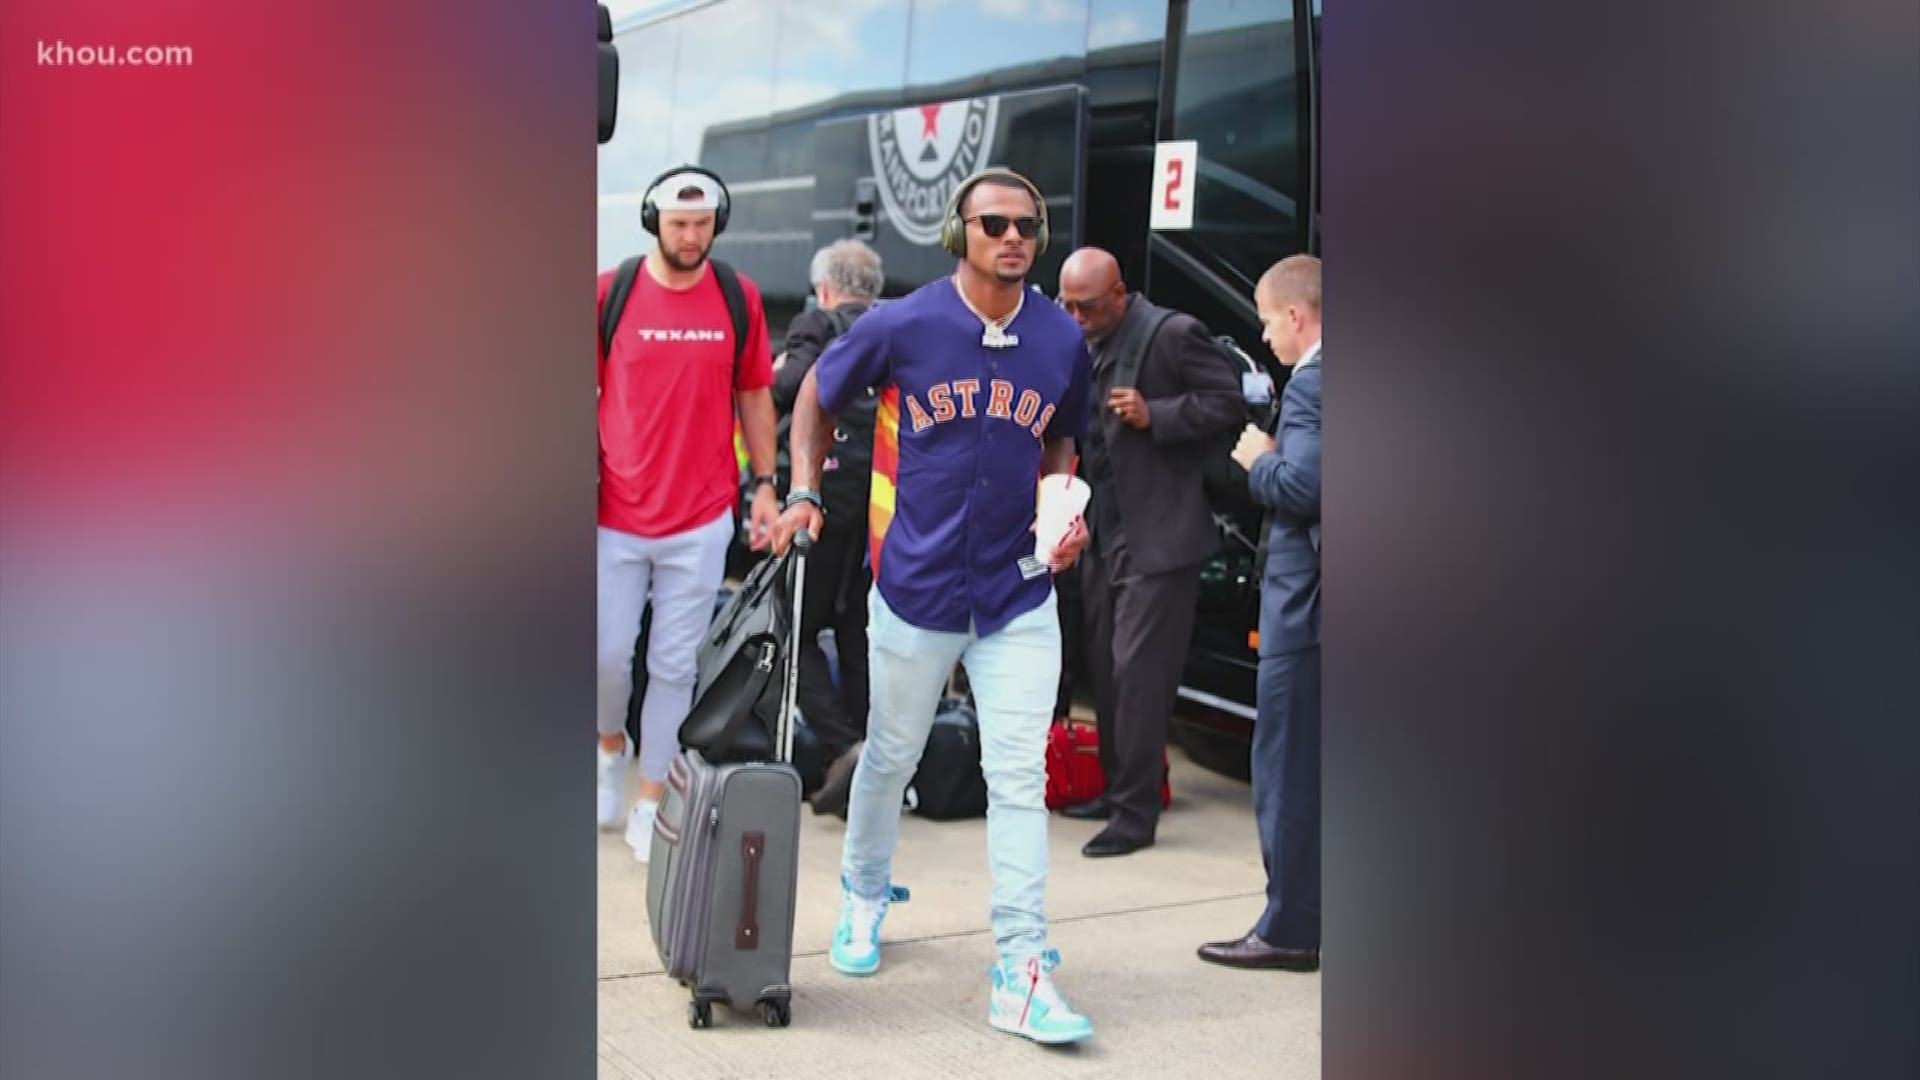 The Houston Texans sported Astros gear before the team took on the Yankees in Game 6 of the ALCS.